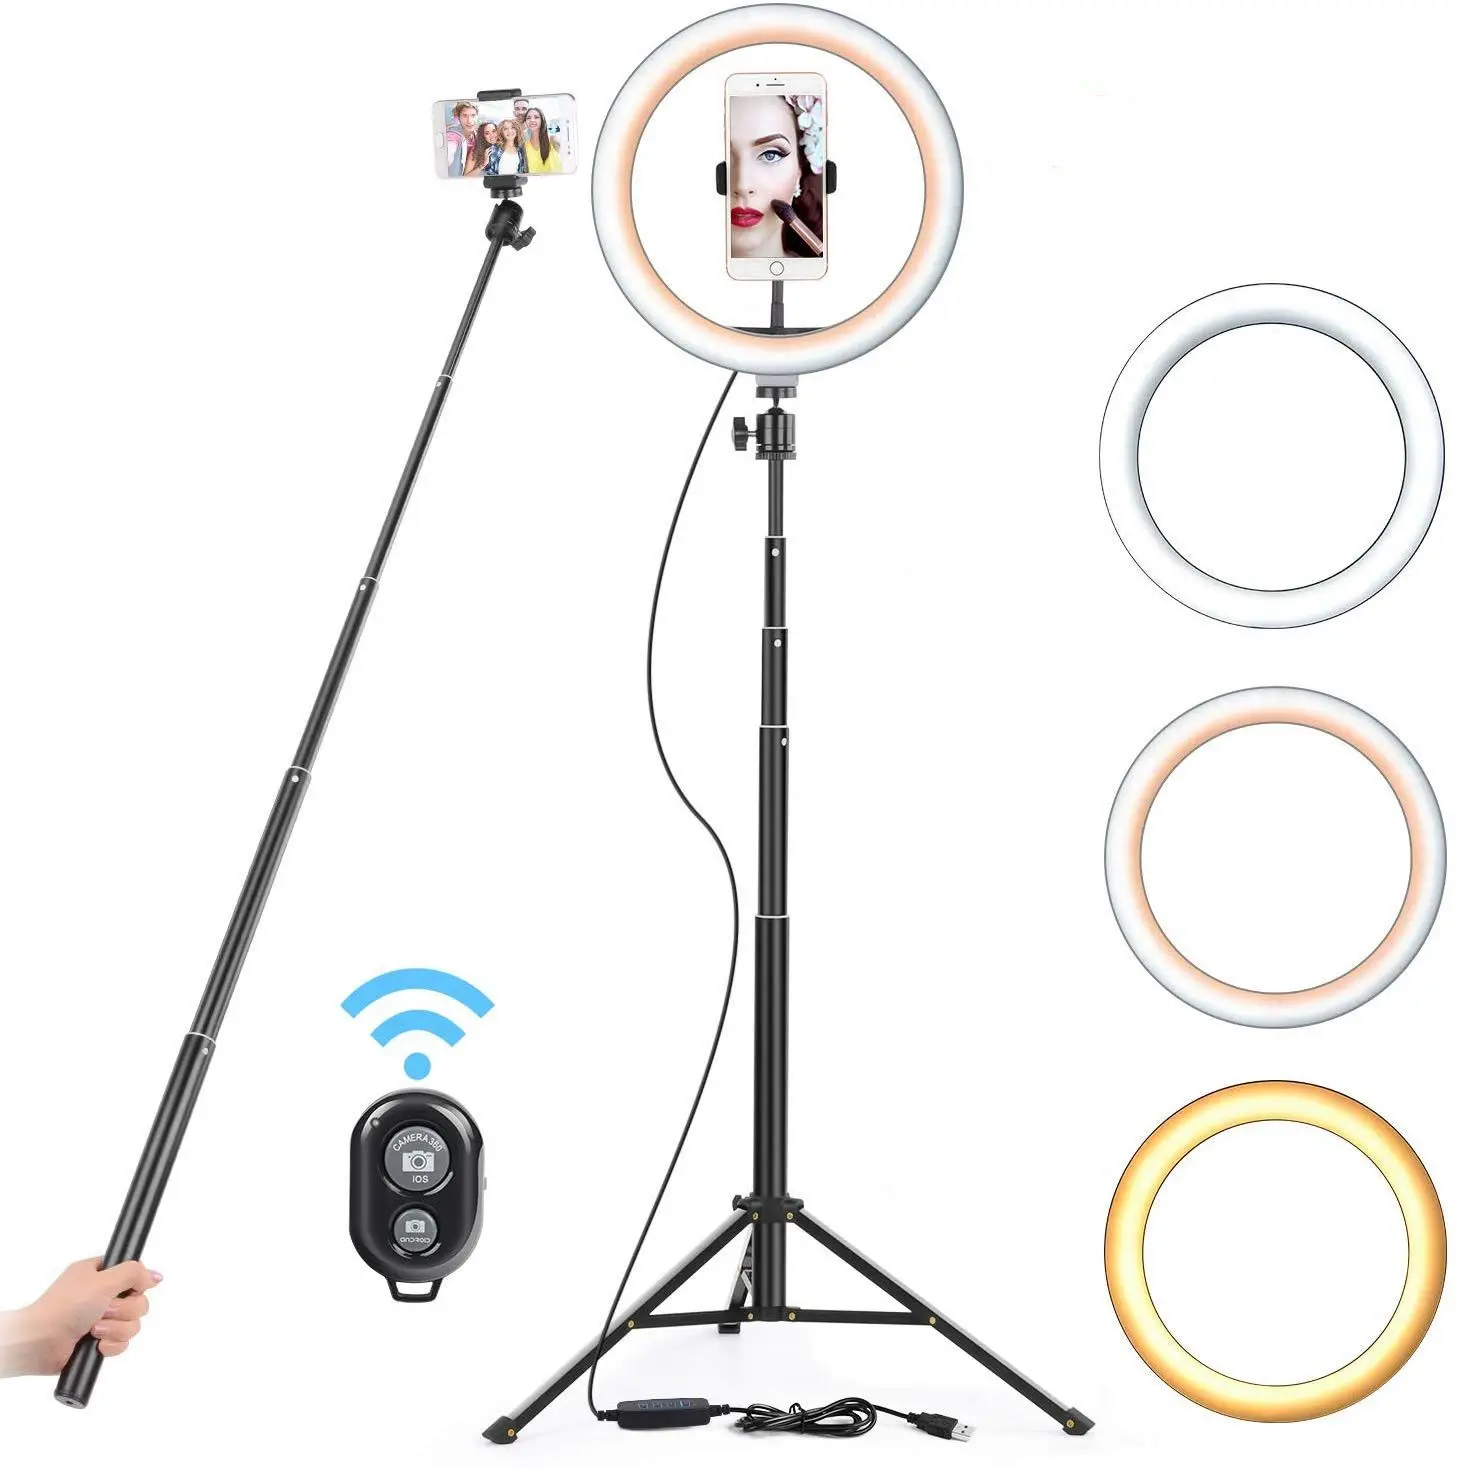 

16 26cm USB LED Ring Light Photography Flash Lamp With 130cm Tripod Stand For Makeup Youtube VK Tik Tok Video Dimmable Lighting